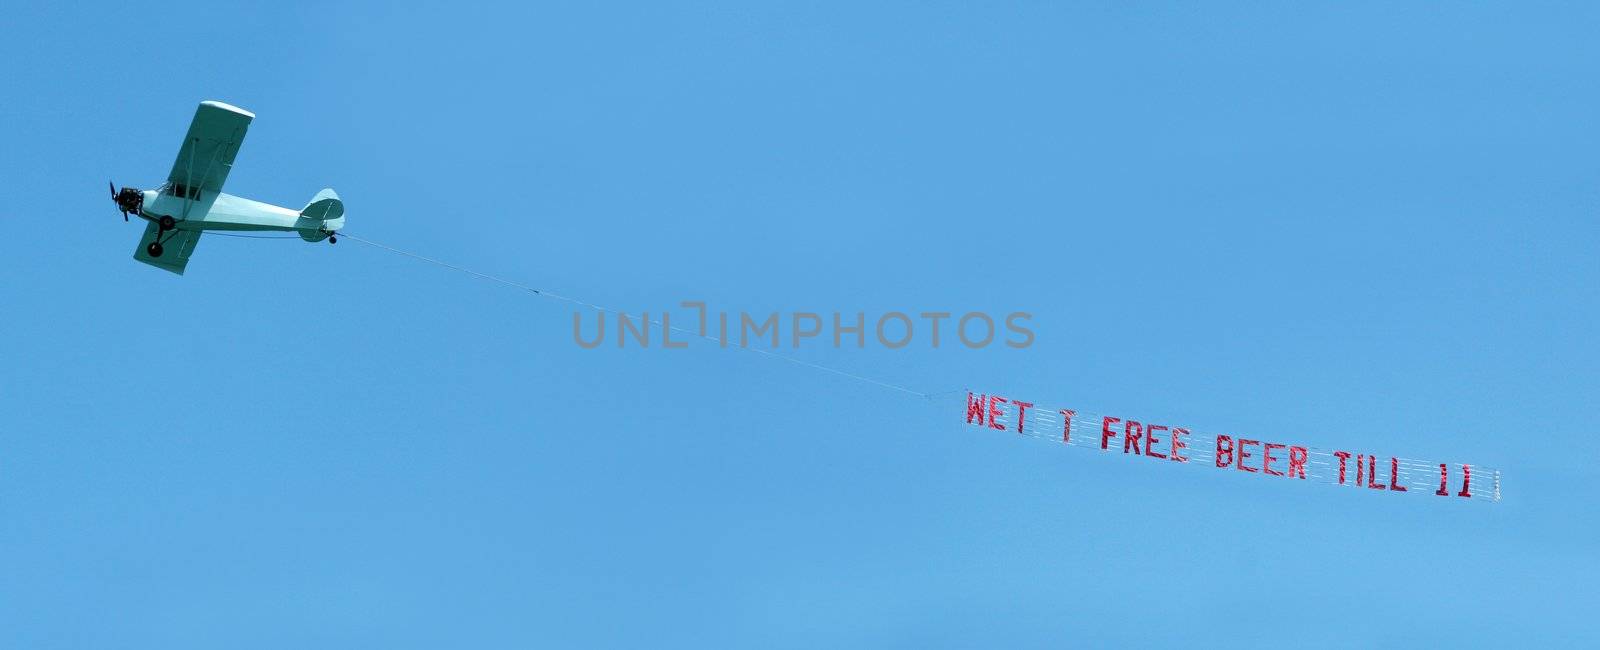 Small airplane towing a spring break banner message through the air